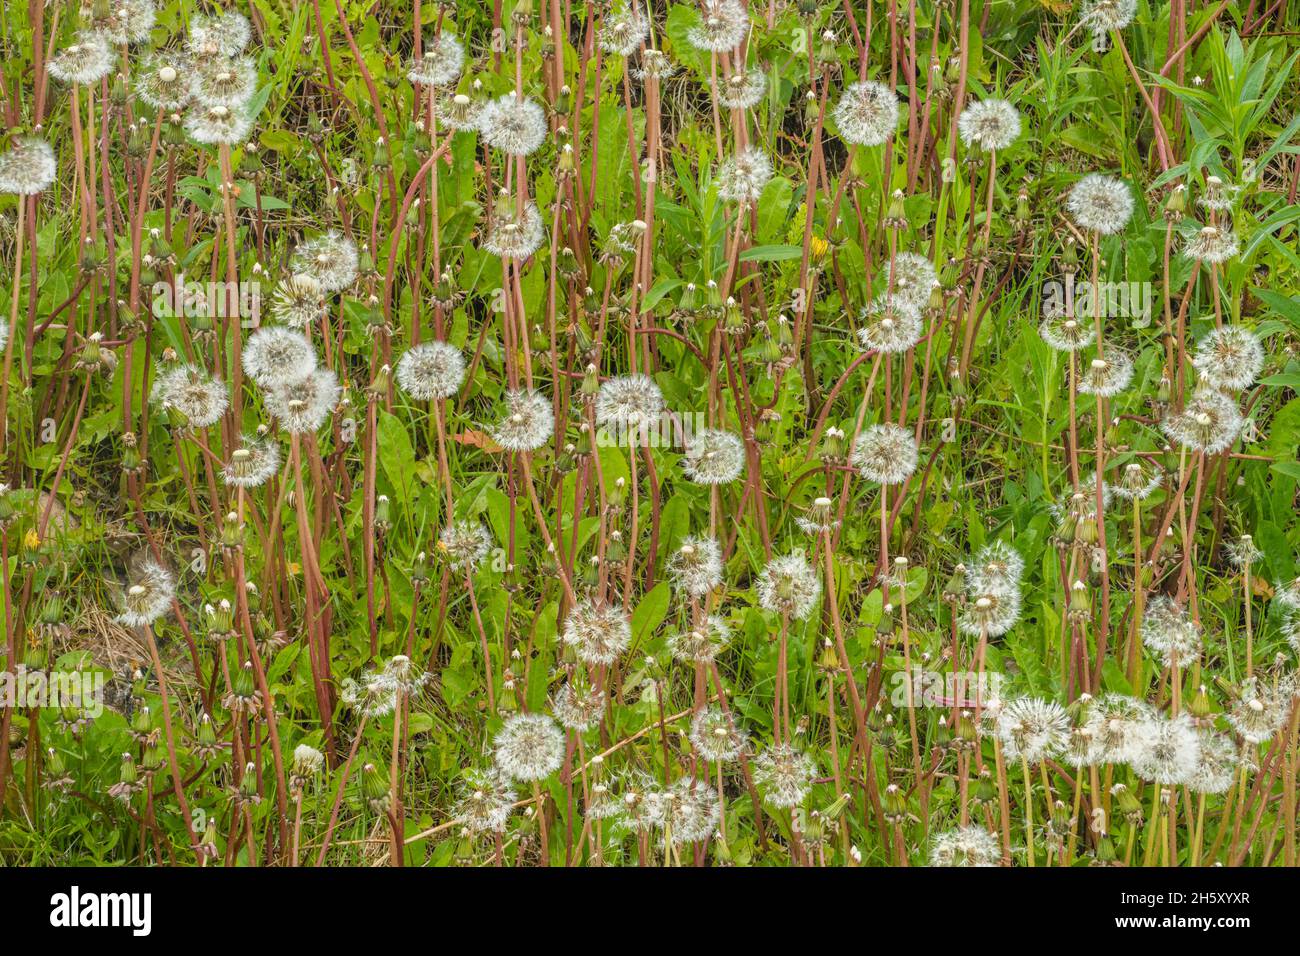 Dandelions (Taraxacum officinale) gone to seed, Sheaves Cove, Newfoundland and Labrador NL, Canada Stock Photo